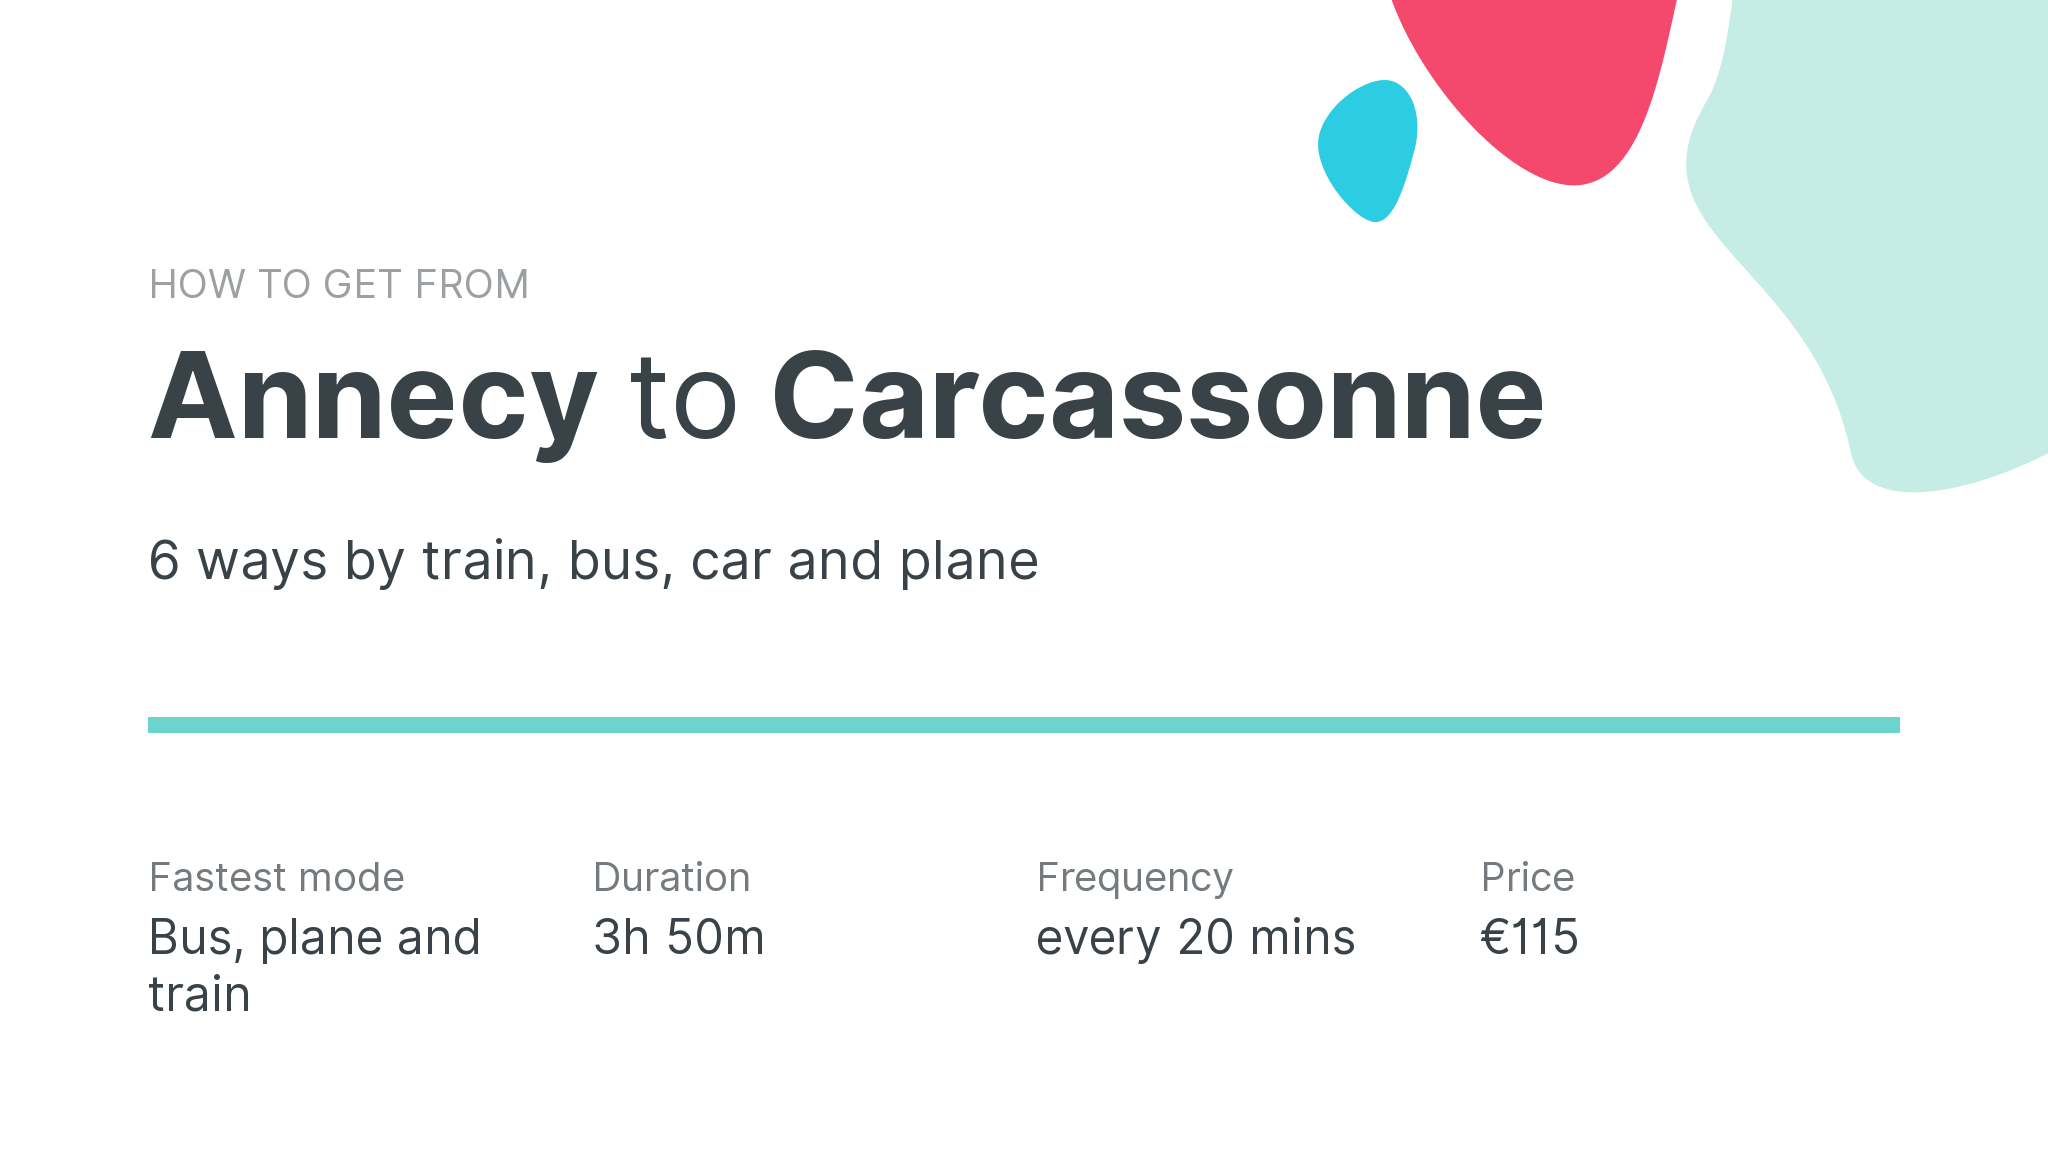 How do I get from Annecy to Carcassonne